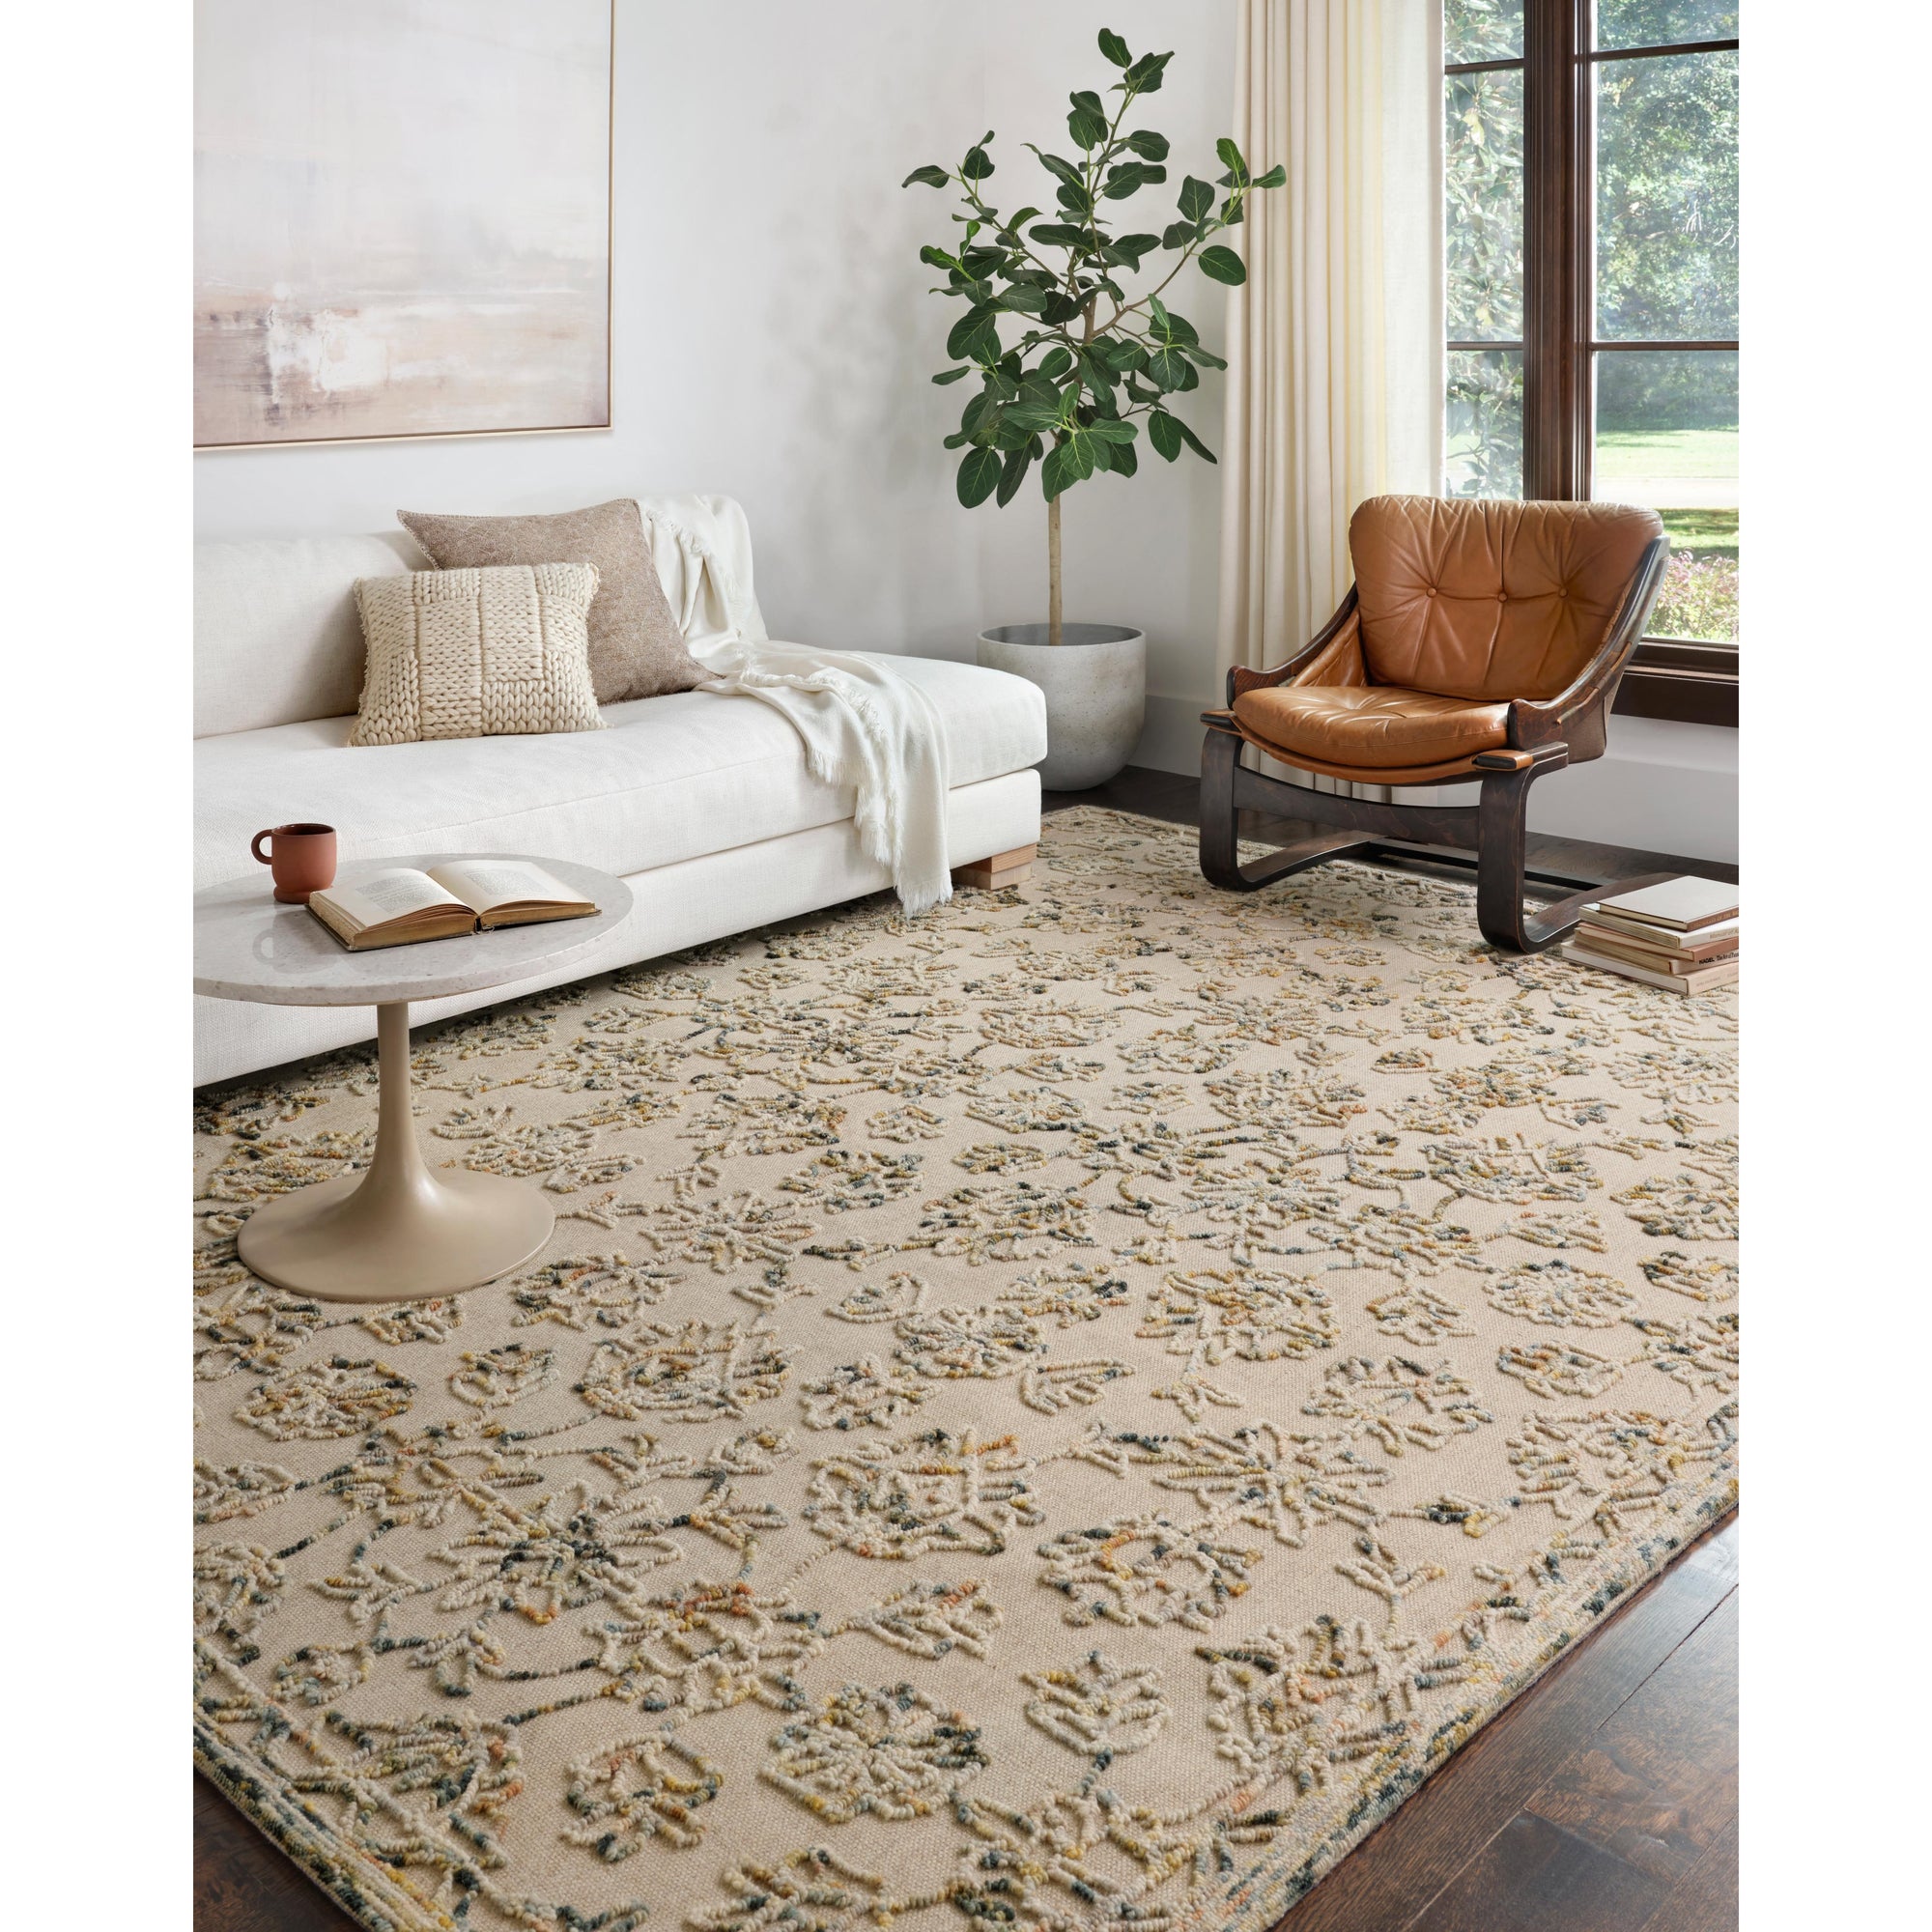 Rugs by Roo Loloi Halle Lagoon Multi Area Rug in size 18" x 18" Sample